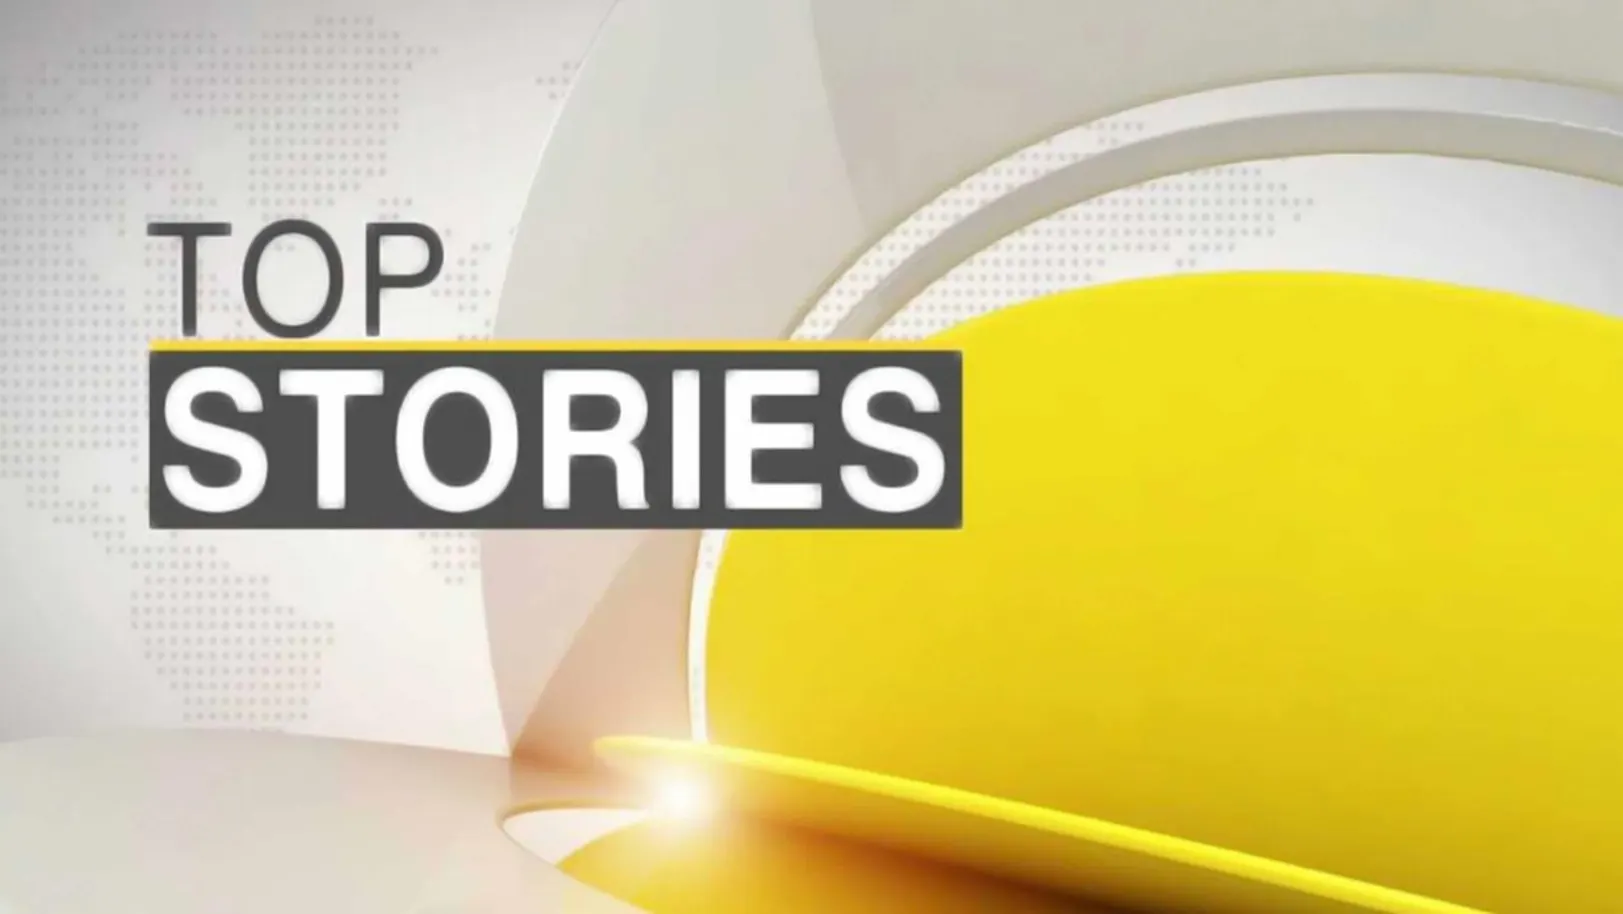 Top Stories Streaming Now On WION